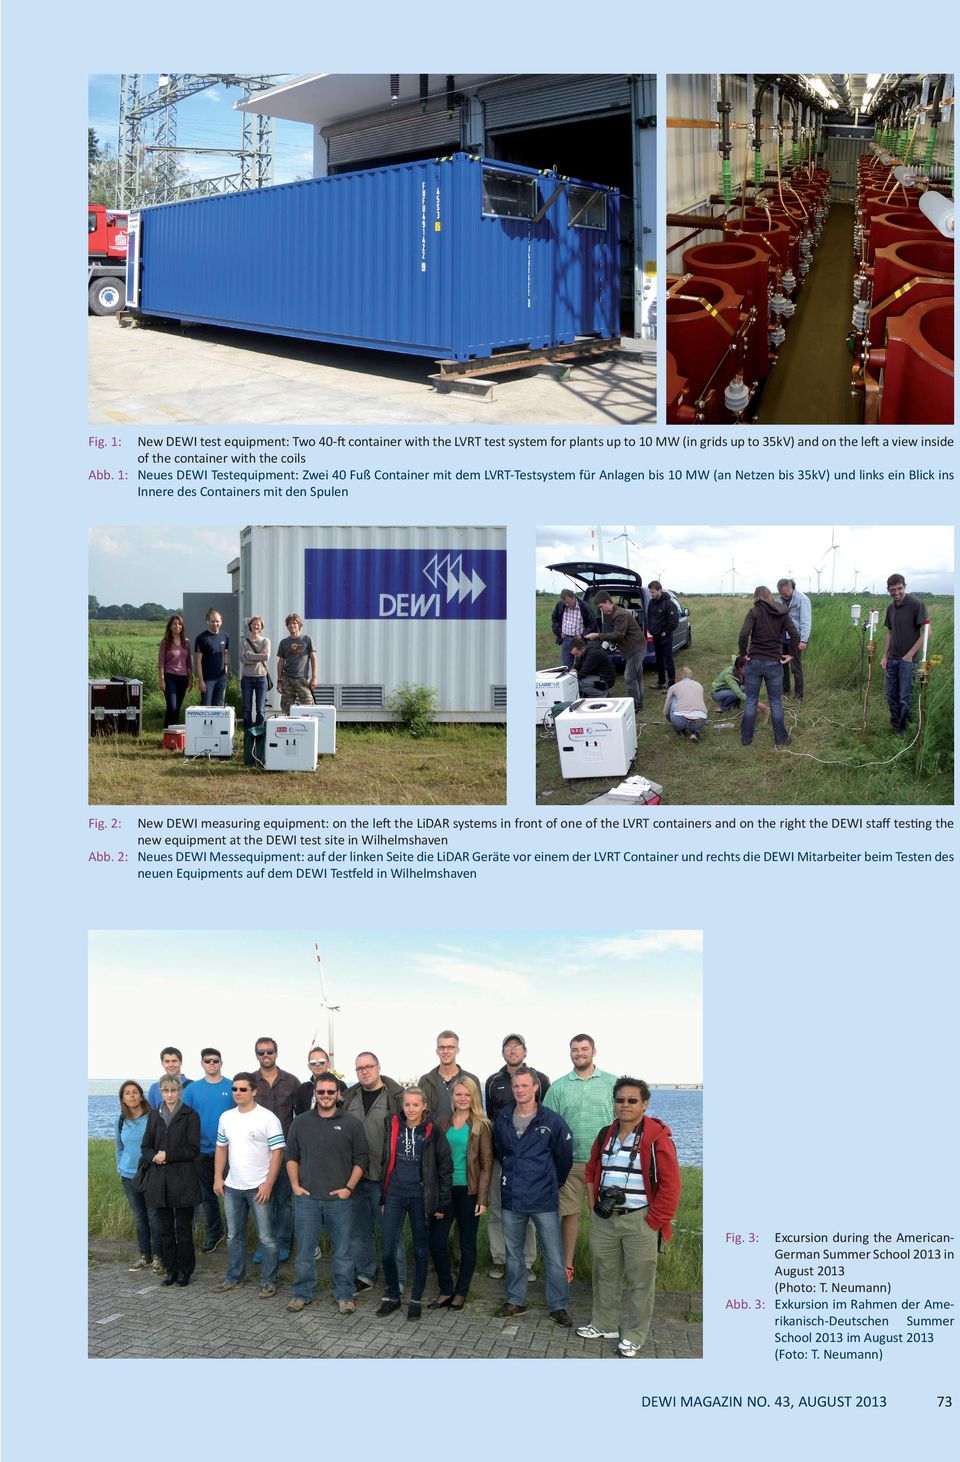 2: New DEWI measuring equipment: on the left the LiDAR systems in front of one of the LVRT containers and on the right the DEWI staff testing the new equipment at the DEWI test site in Wilhelmshaven